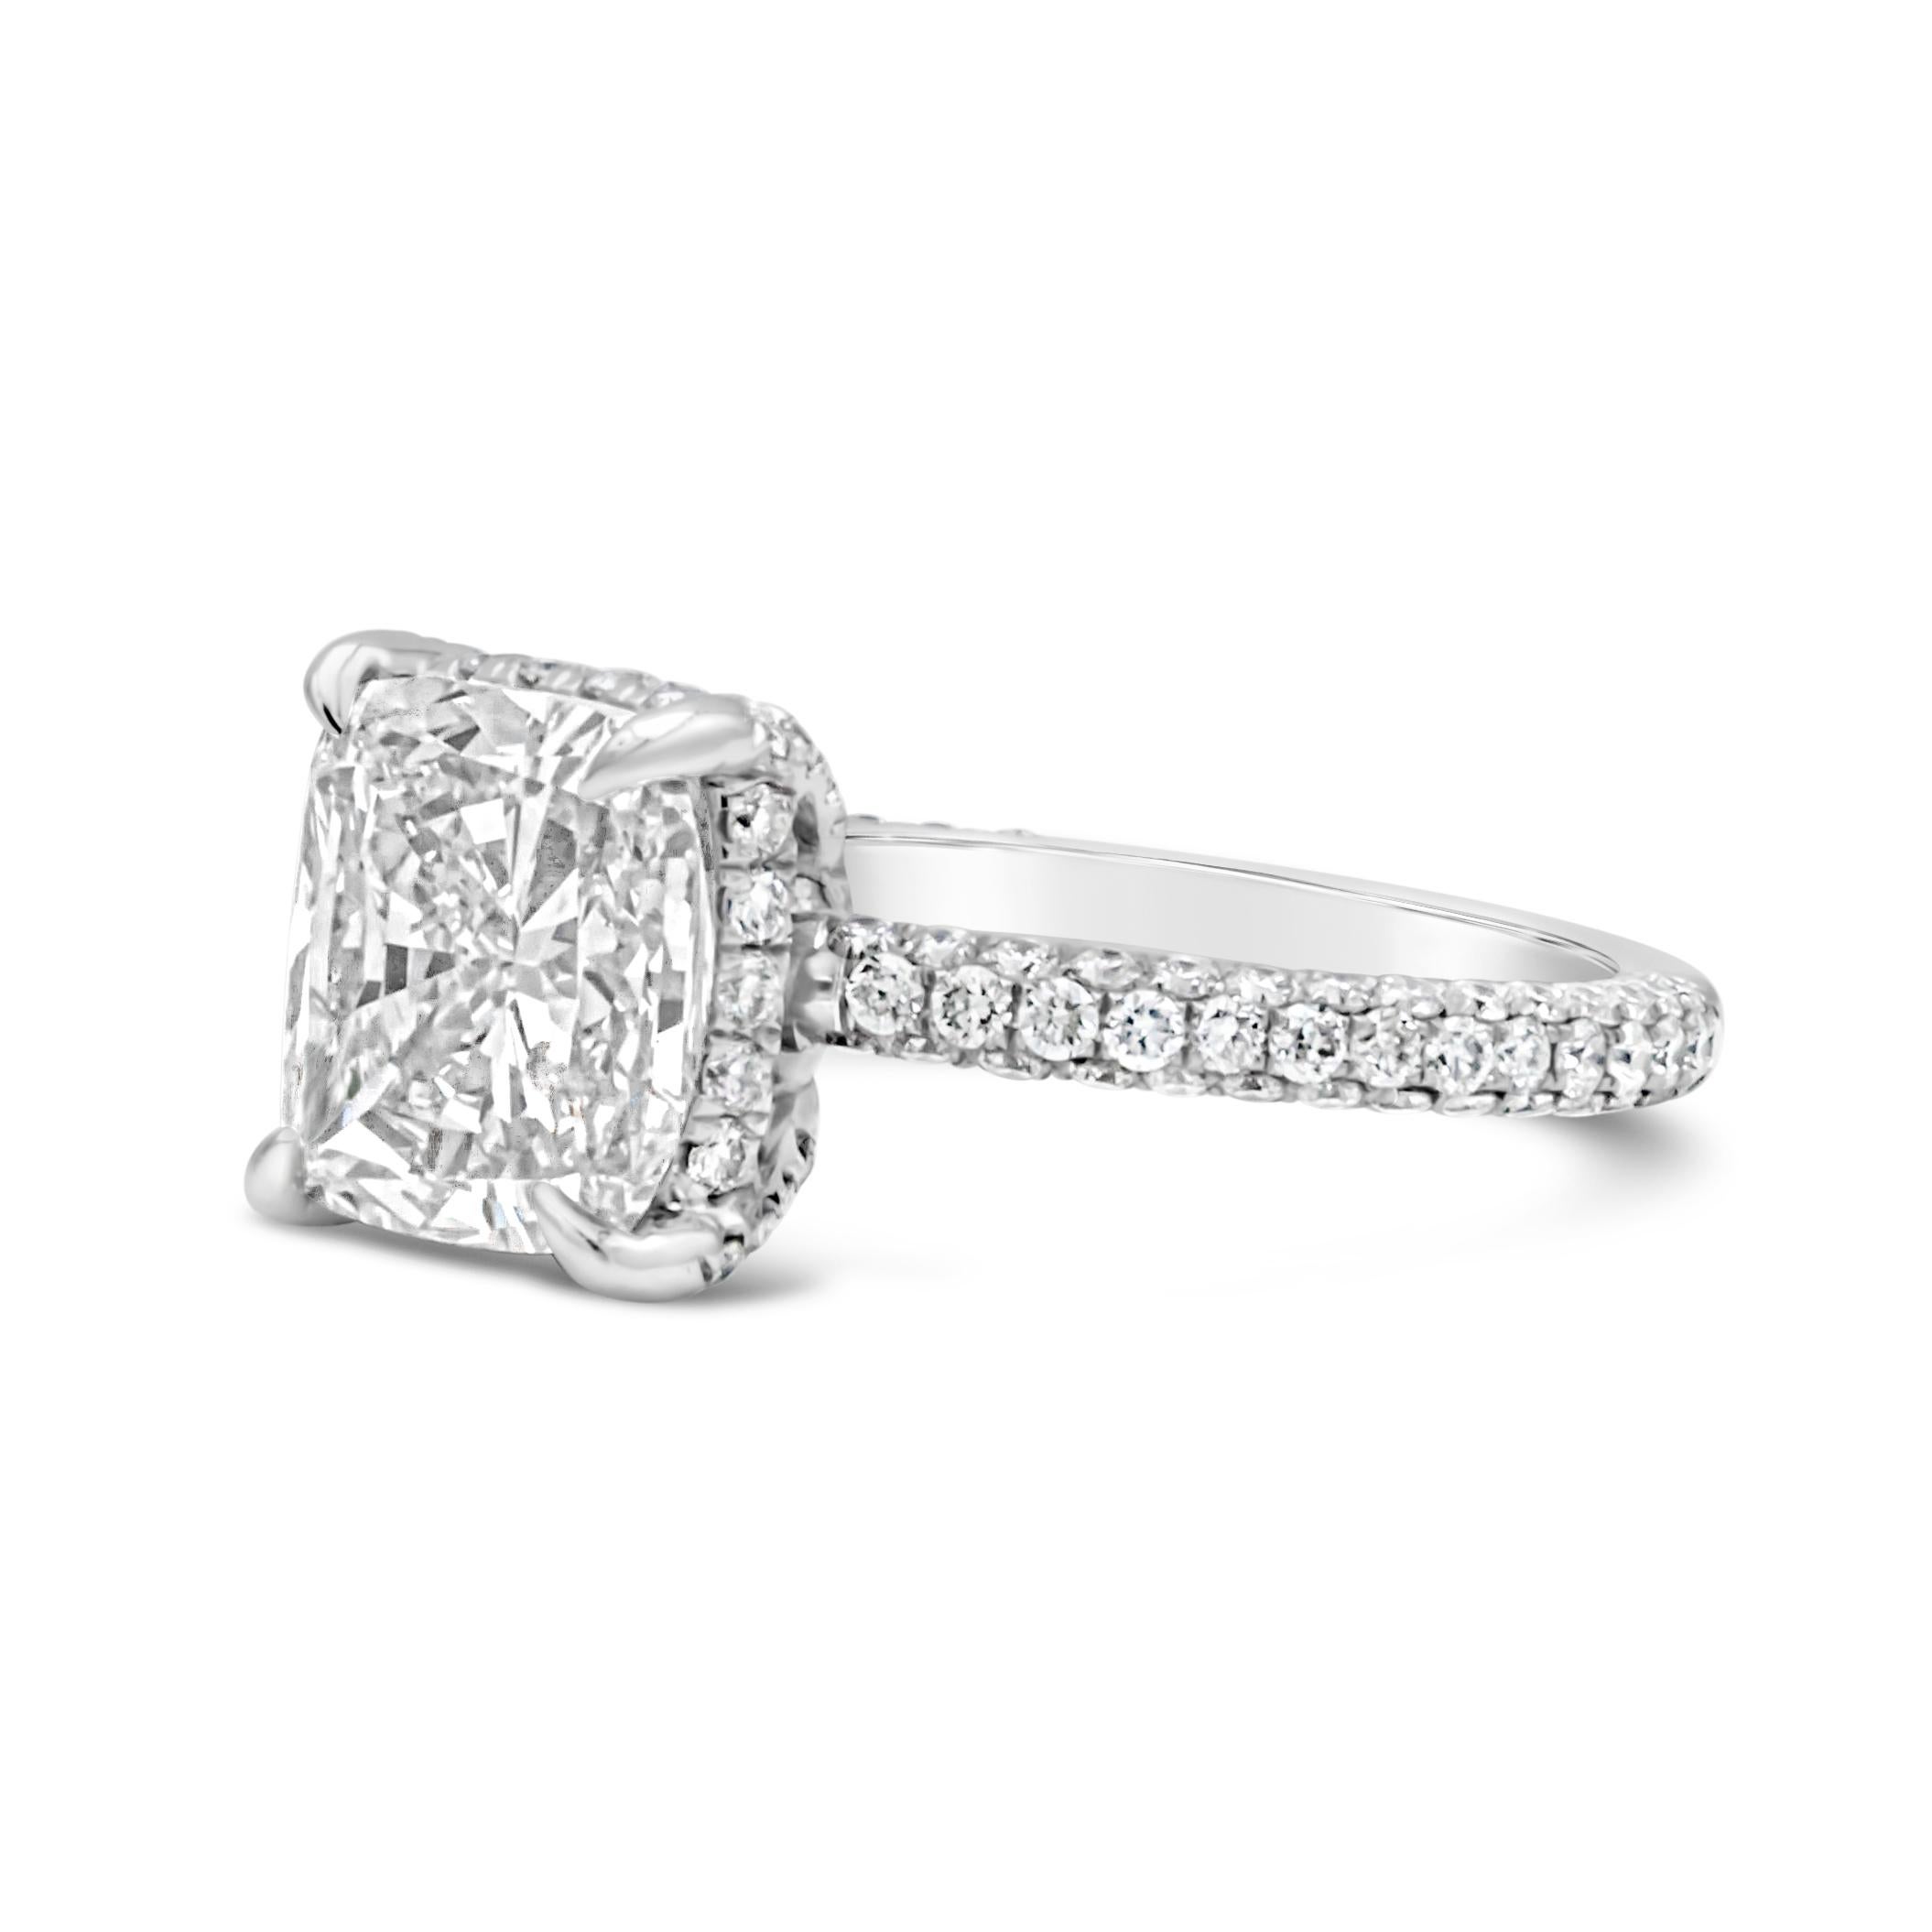 An elegant engagement ring, showcasing a 3.01 carats cushion cut diamond certified by GIA as J color and I1 clarity, set on a four claw prong basket. Accented by 120 round brilliant cut diamonds weighing 0.85 carat total, set on a scalloped pavé